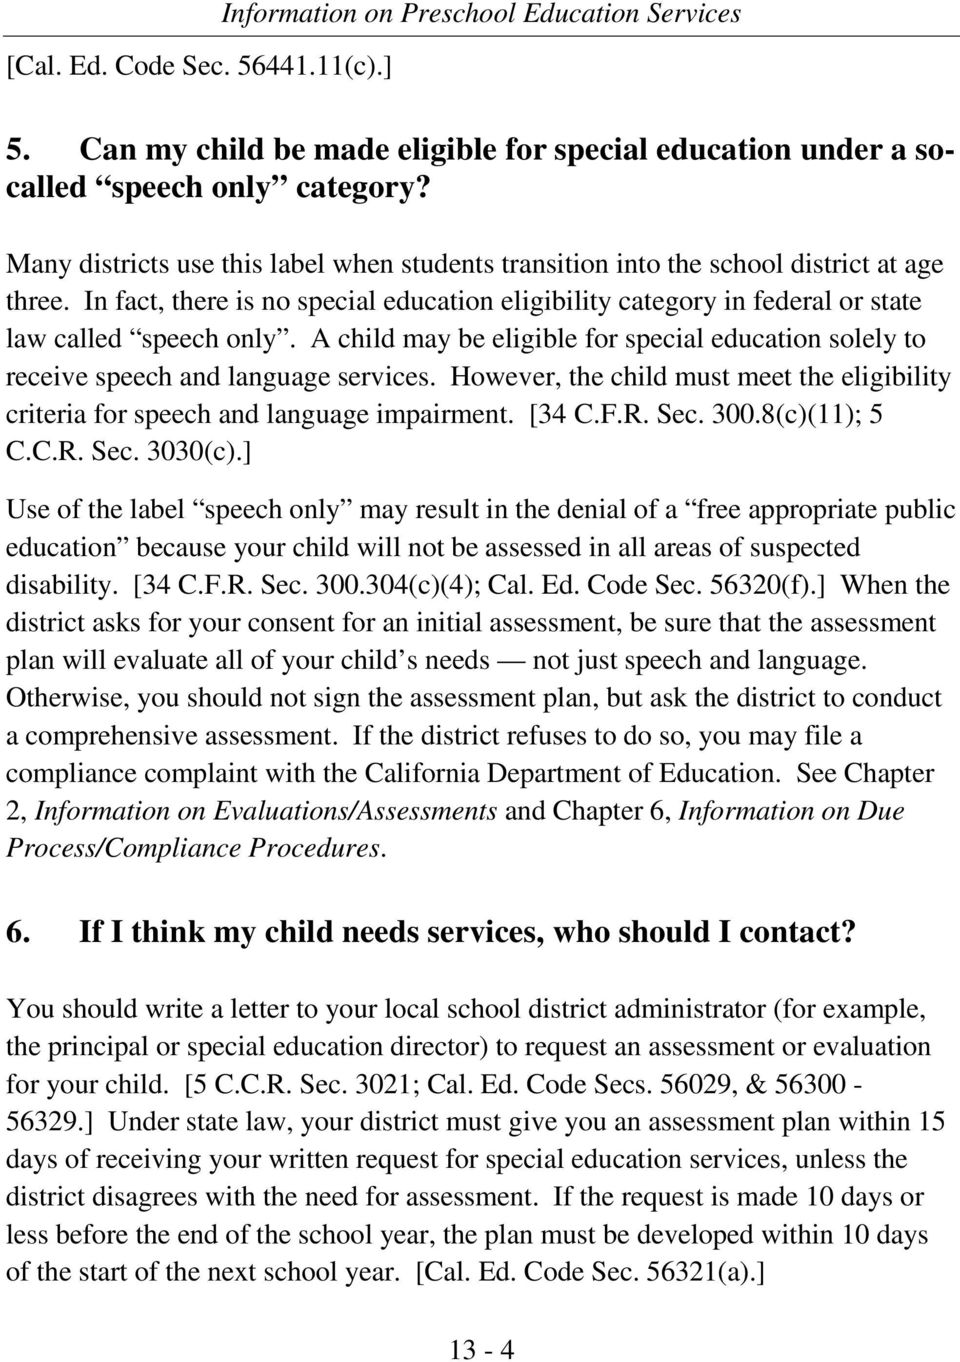 A child may be eligible for special education solely to receive speech and language services. However, the child must meet the eligibility criteria for speech and language impairment. [34 C.F.R. Sec.